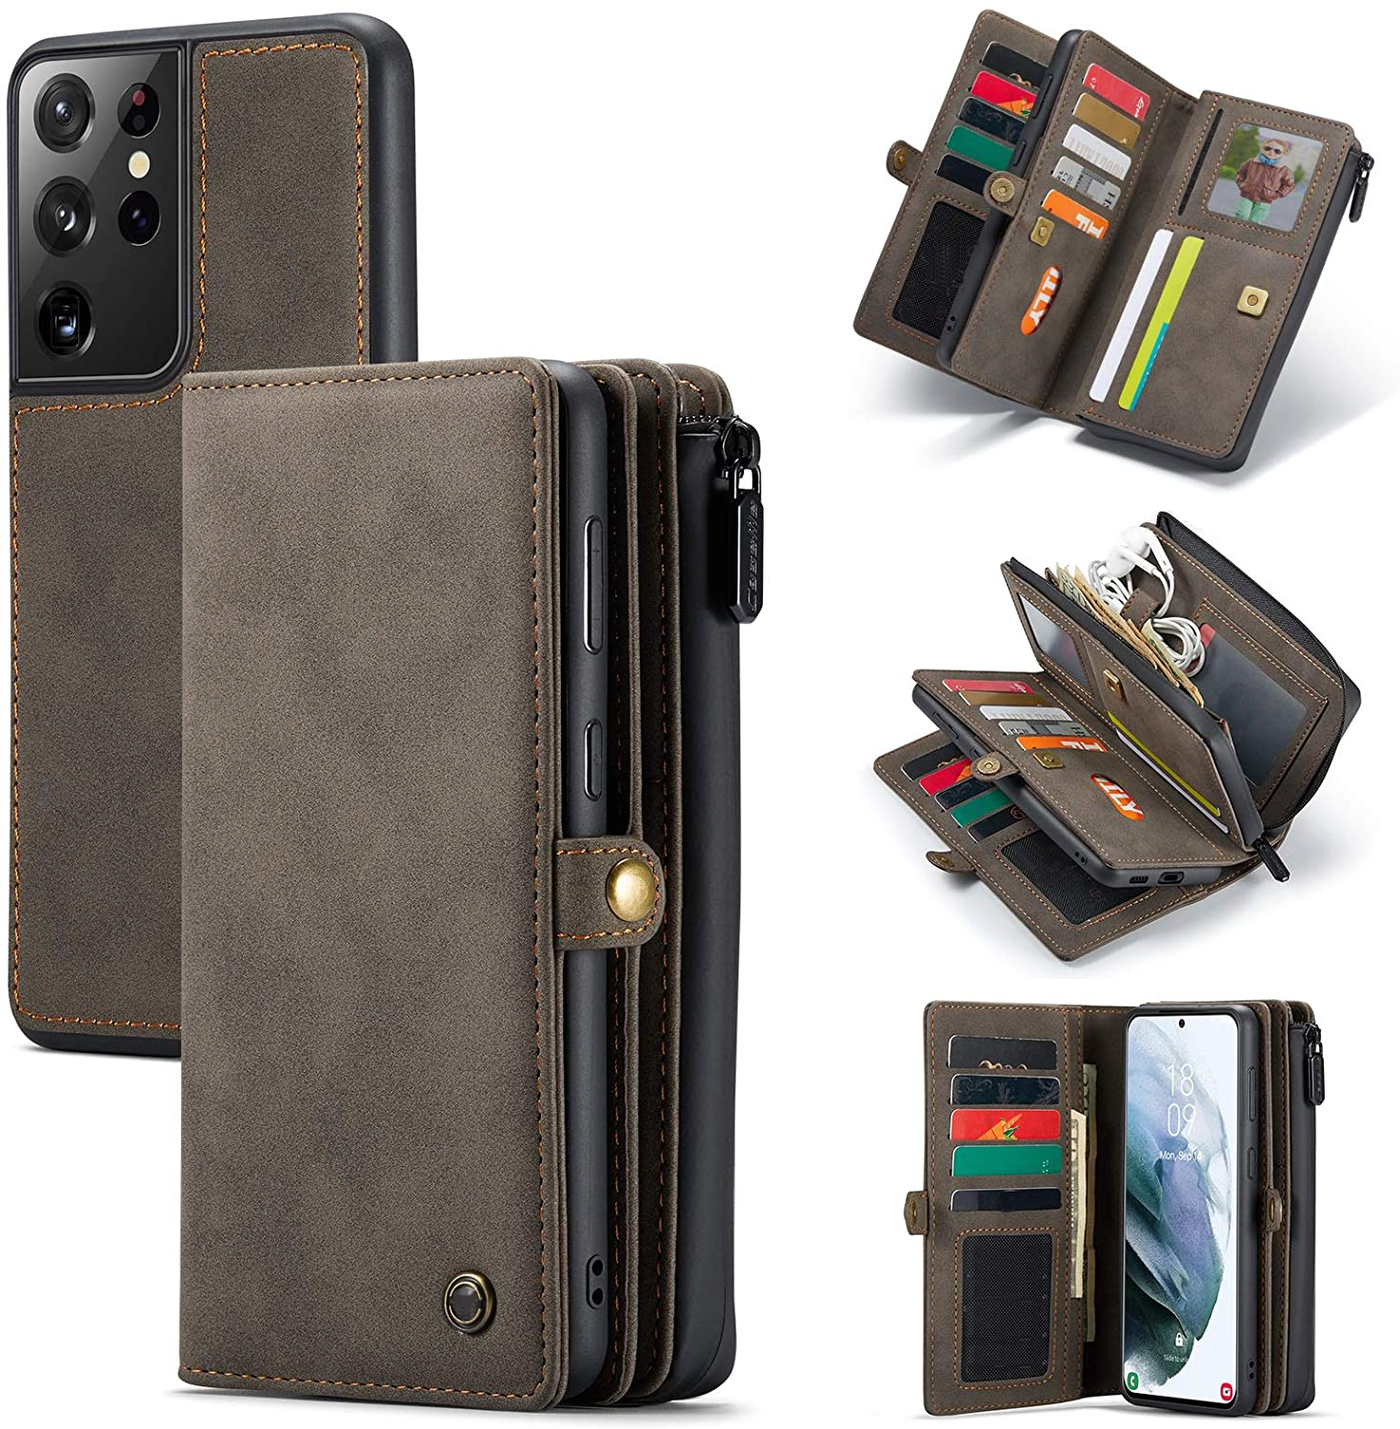 Samsung Galaxy S21 Ultra leather multifunctional wallet case cover by excelsior